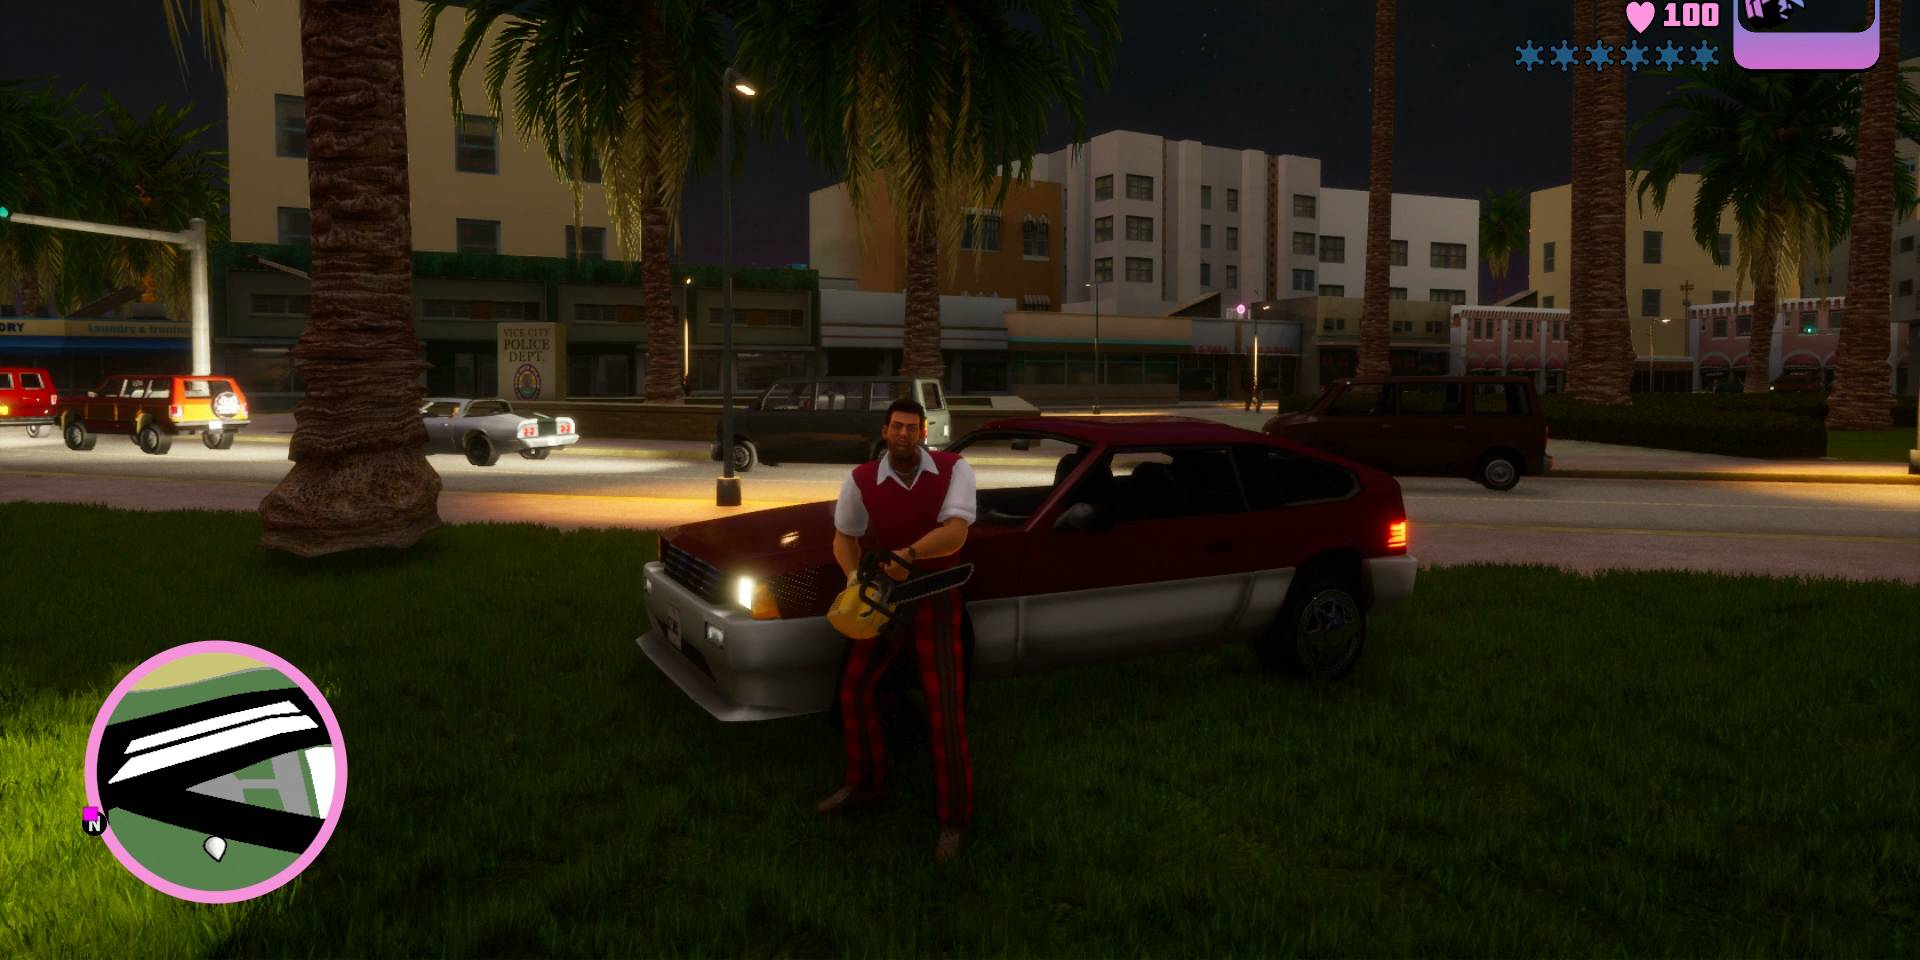 The 10 Fastest Cars in Grand Theft Auto: Vice City – Definitive Edition